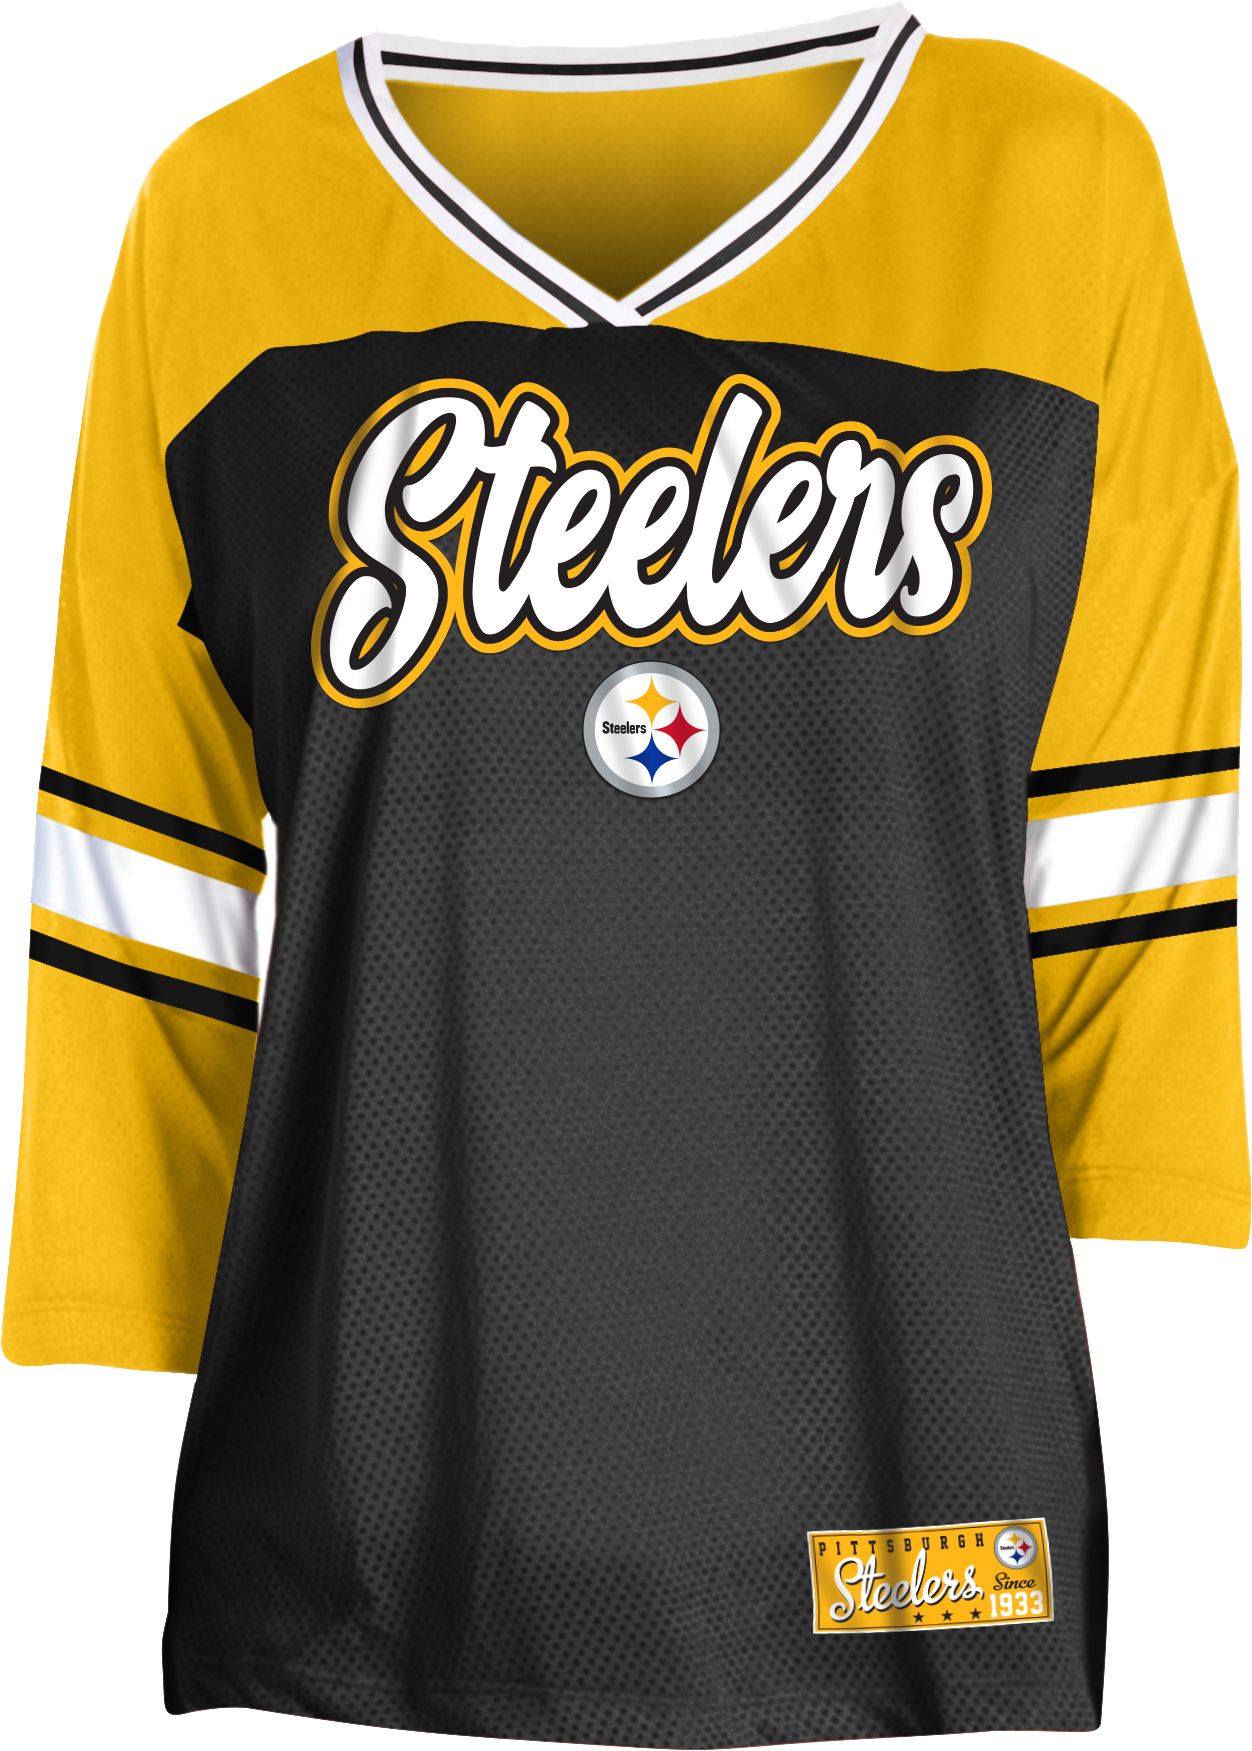 best place to buy steelers gear in pittsburgh